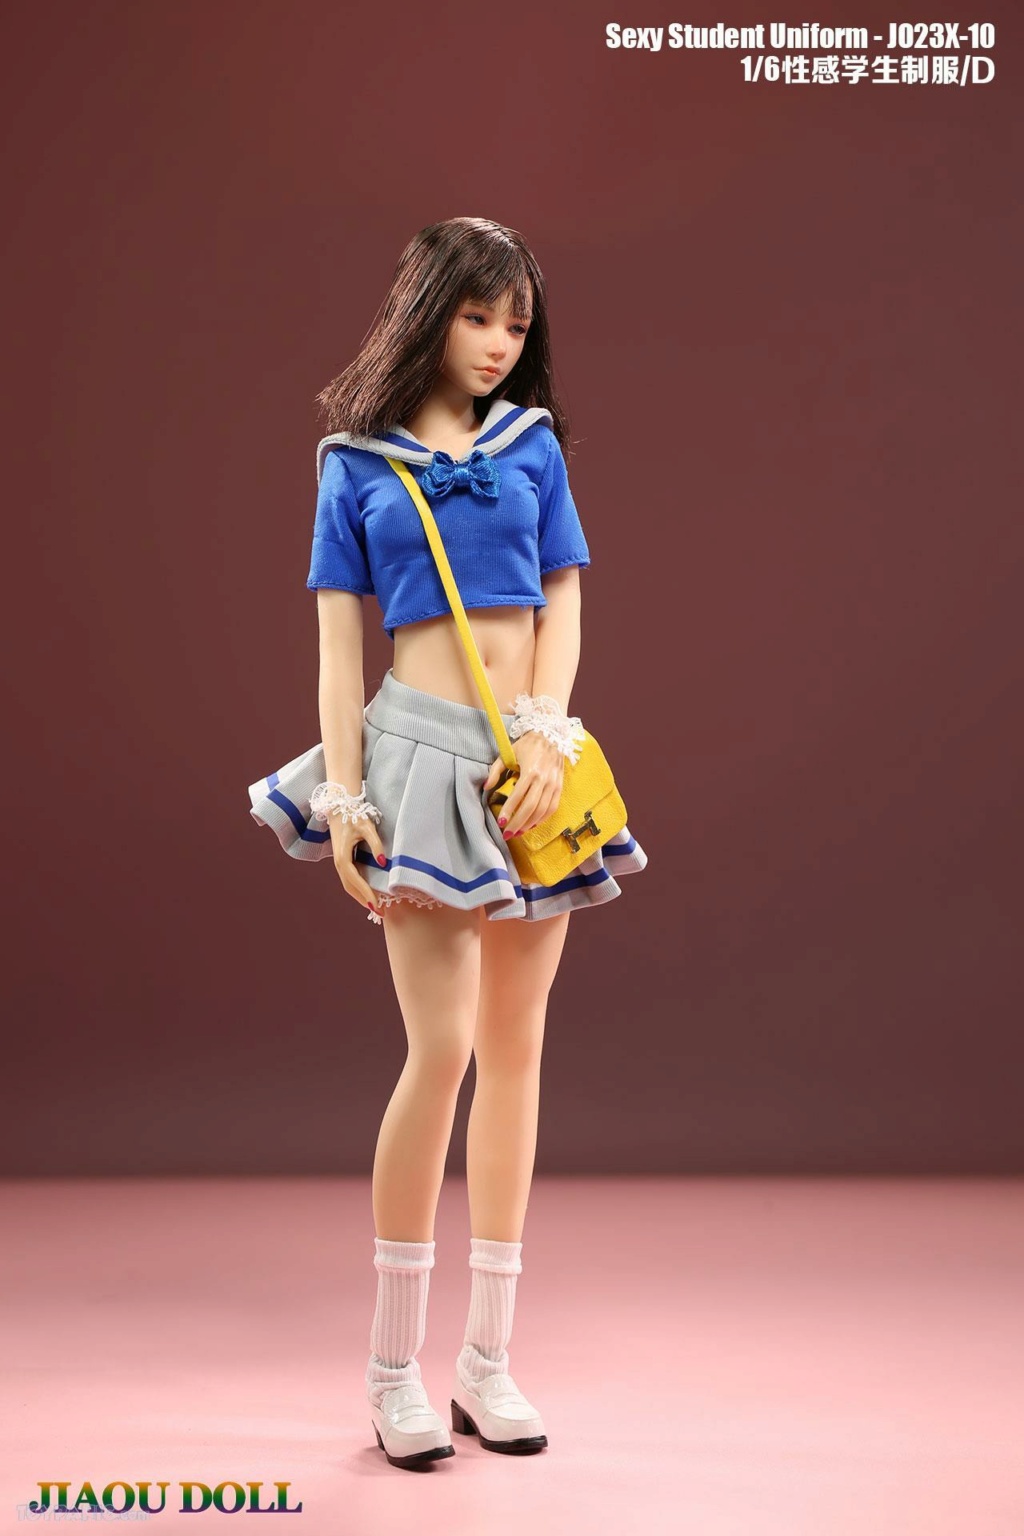 NEW PRODUCT: Jiaou Doll: 1/6 Sexy Student Uniform (7 color options) (JO23X-10A-G) (NSFW) 20920231